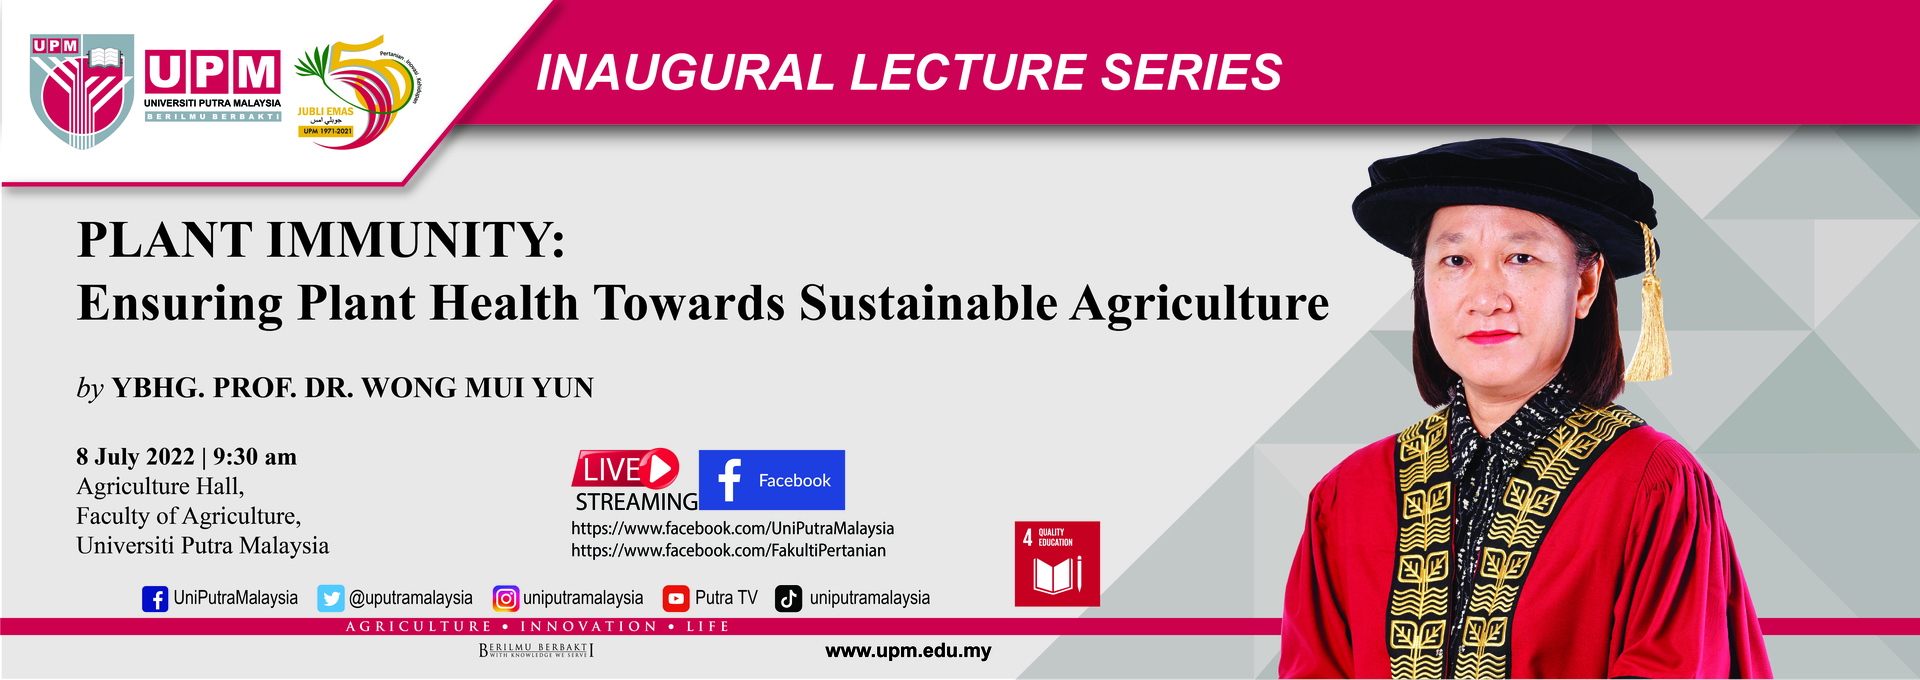 Inaugural Lecture Series